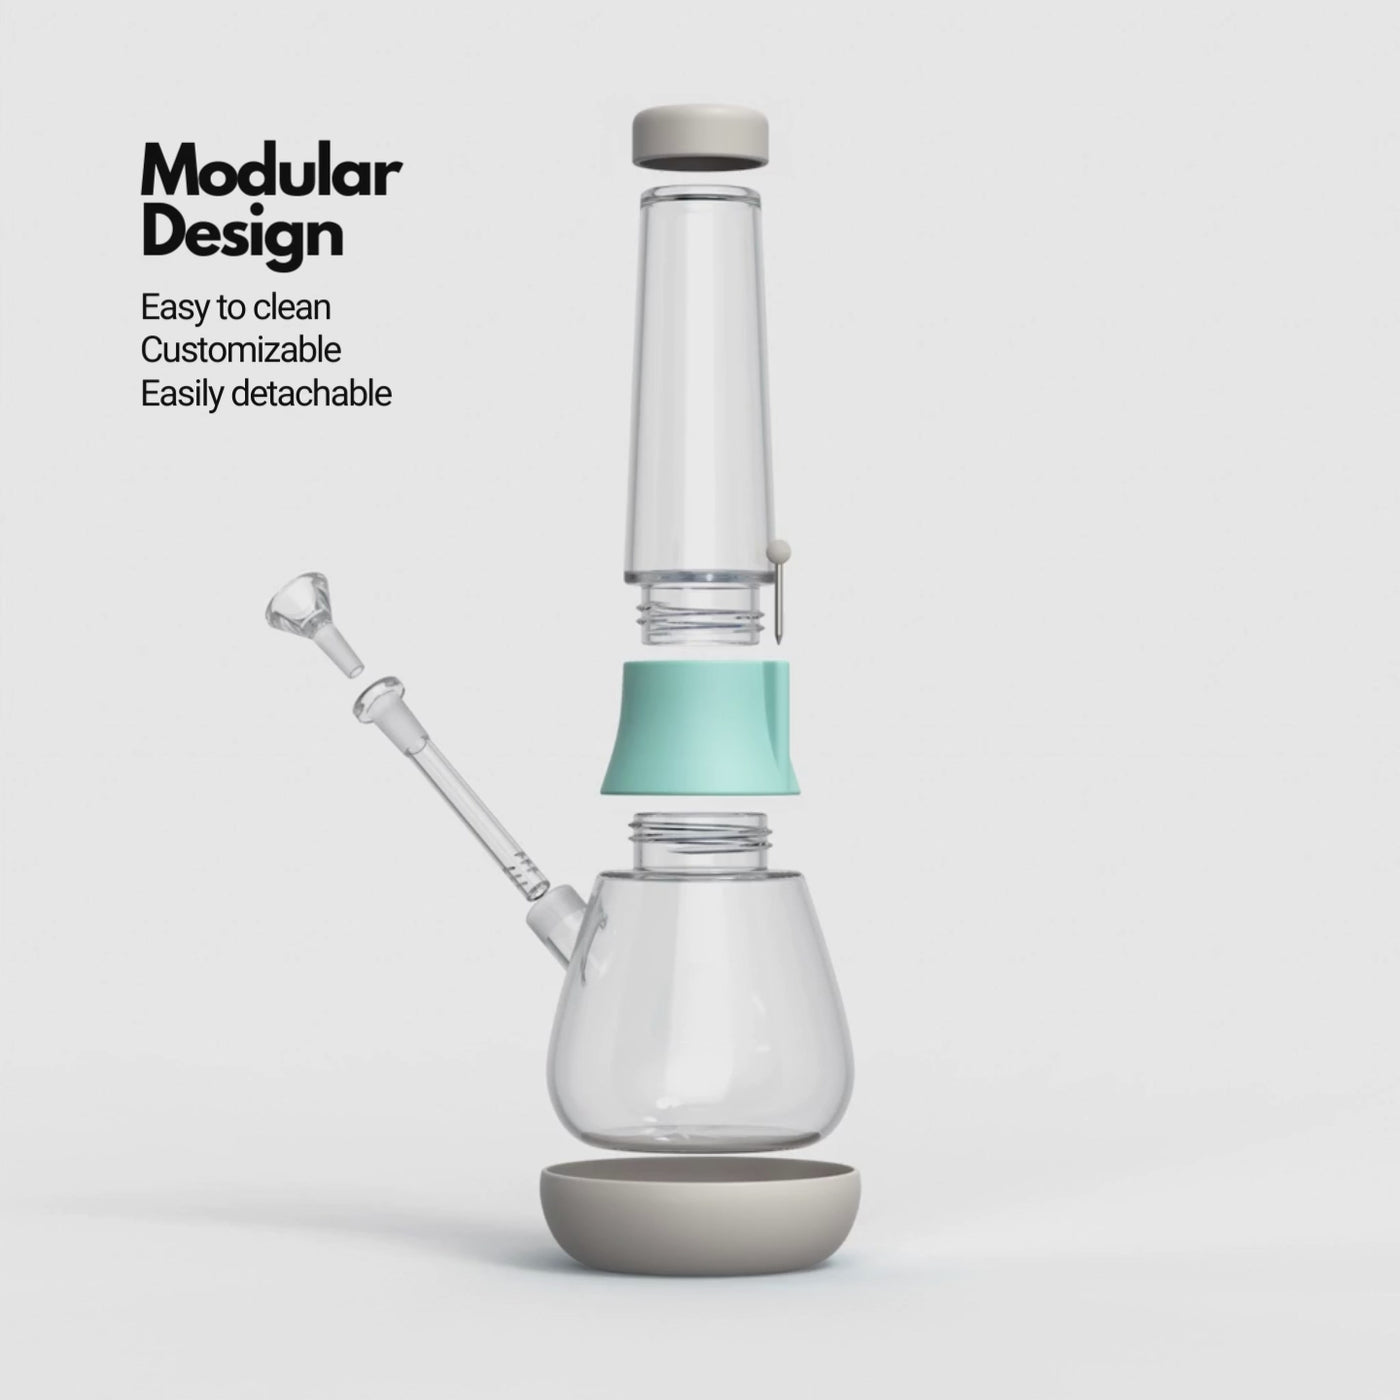 A GIF of an exploded view of Weeday modular glass bong in cream & sky color mix, highlighting its customizable and detachable features.